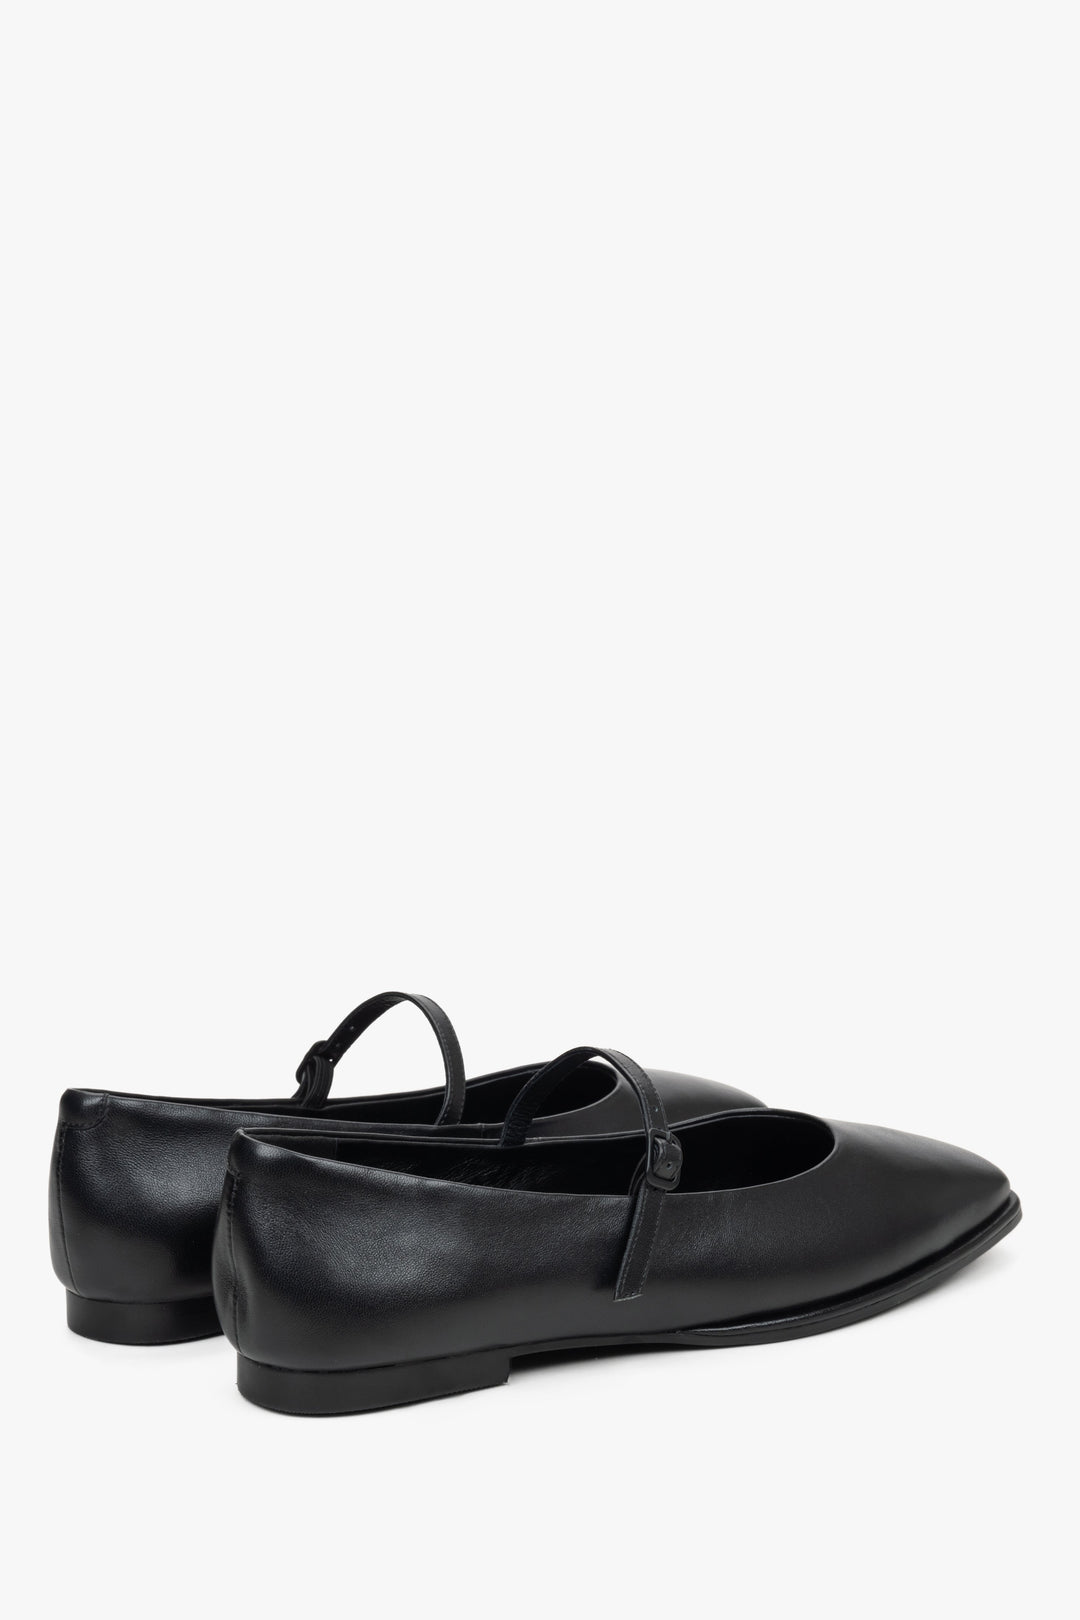 Women's black leather ballet flats by Estro - close-up on the heel and side line of the shoes.